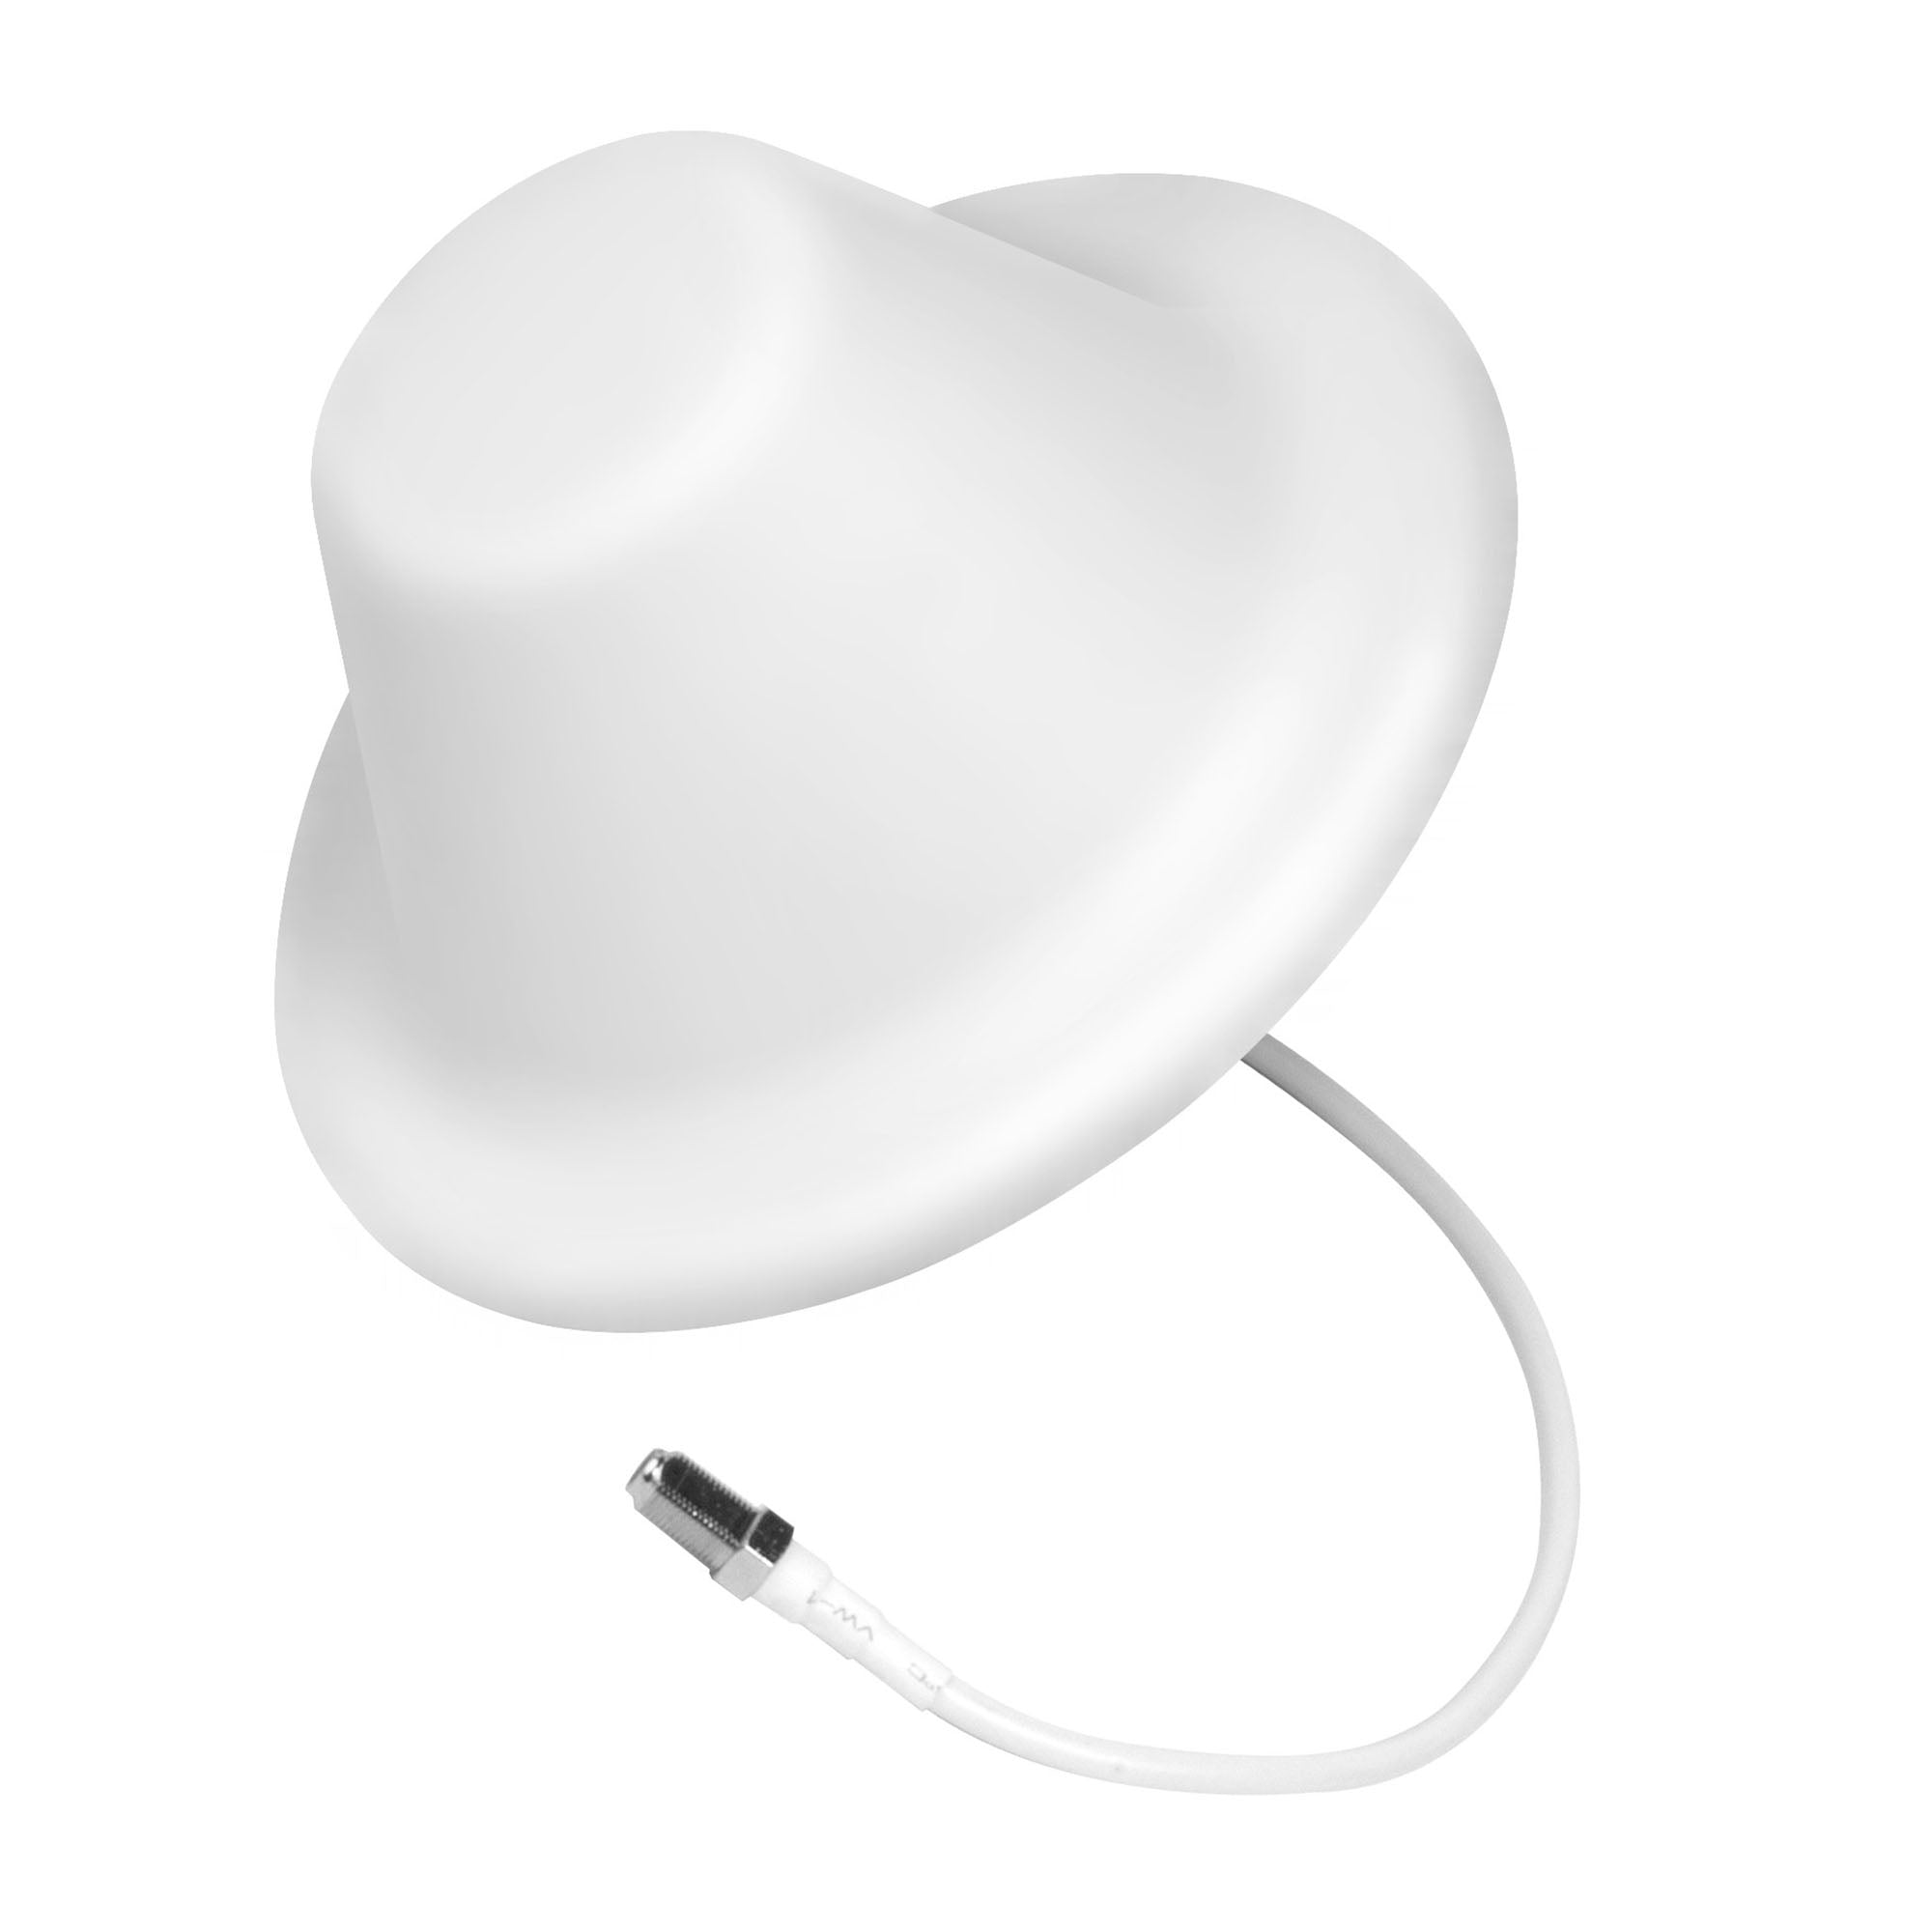 Wilson 4G Dome Antenna 75 ohm w/ 12 in. Pigtail F-Female - 15-01375